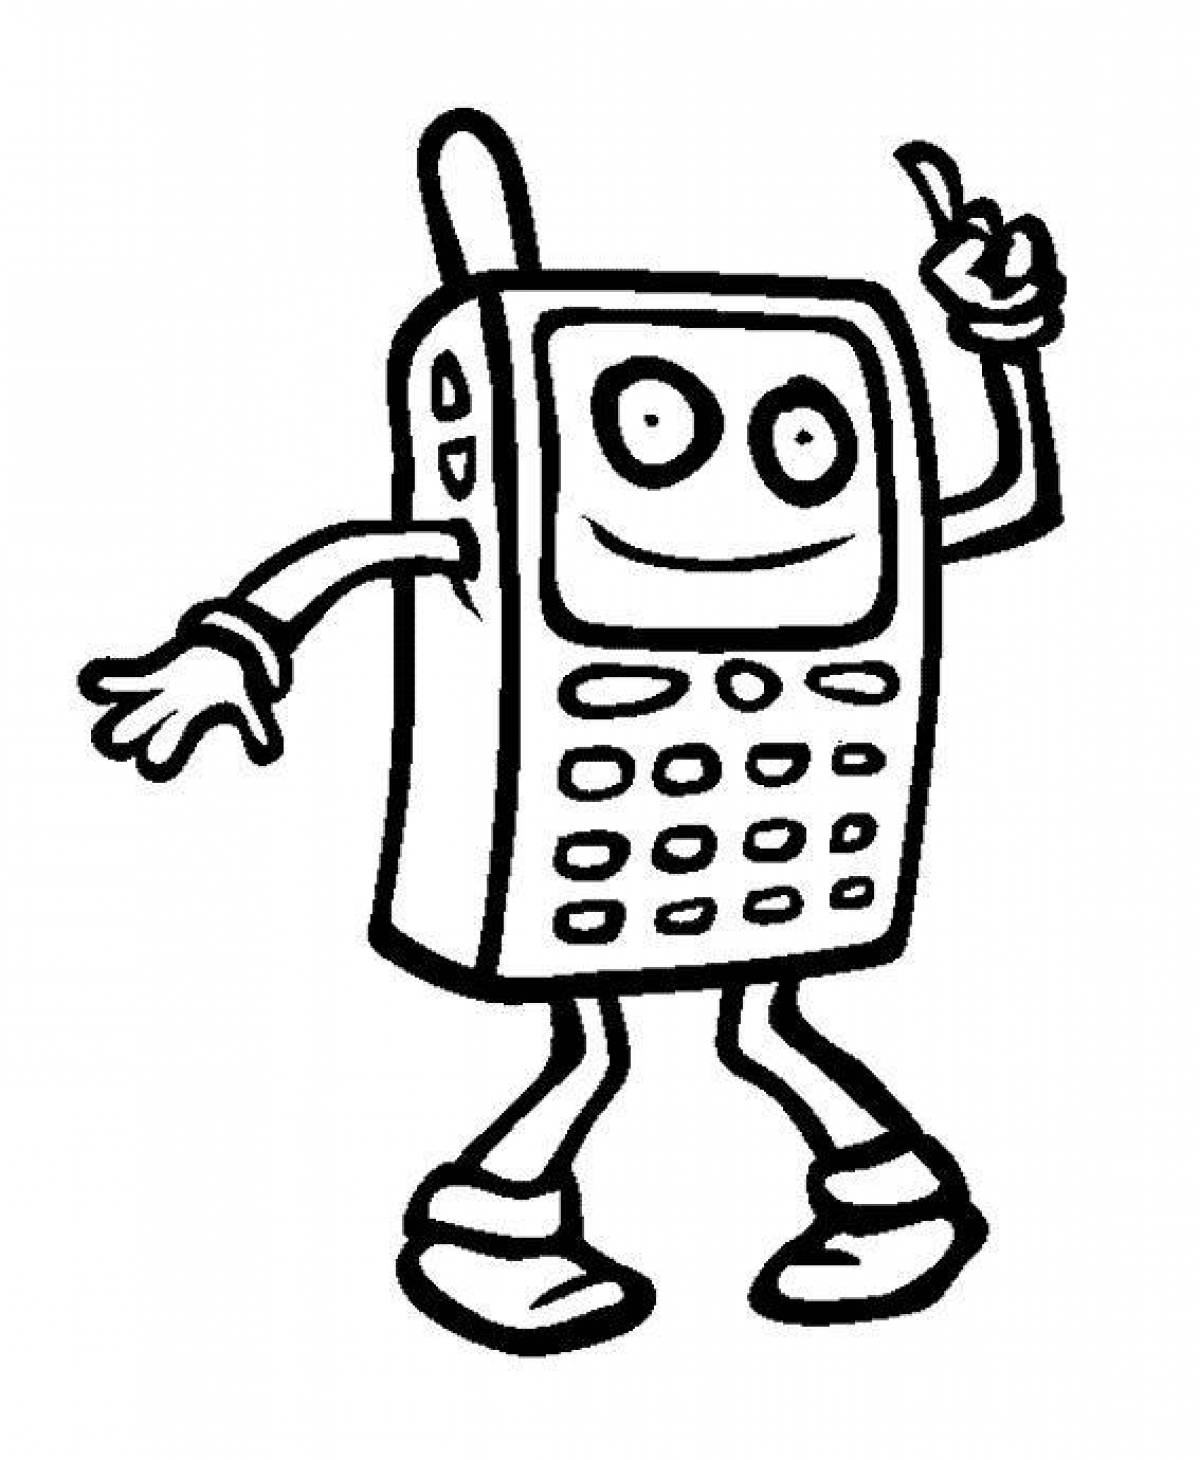 Awesome cell phone coloring page